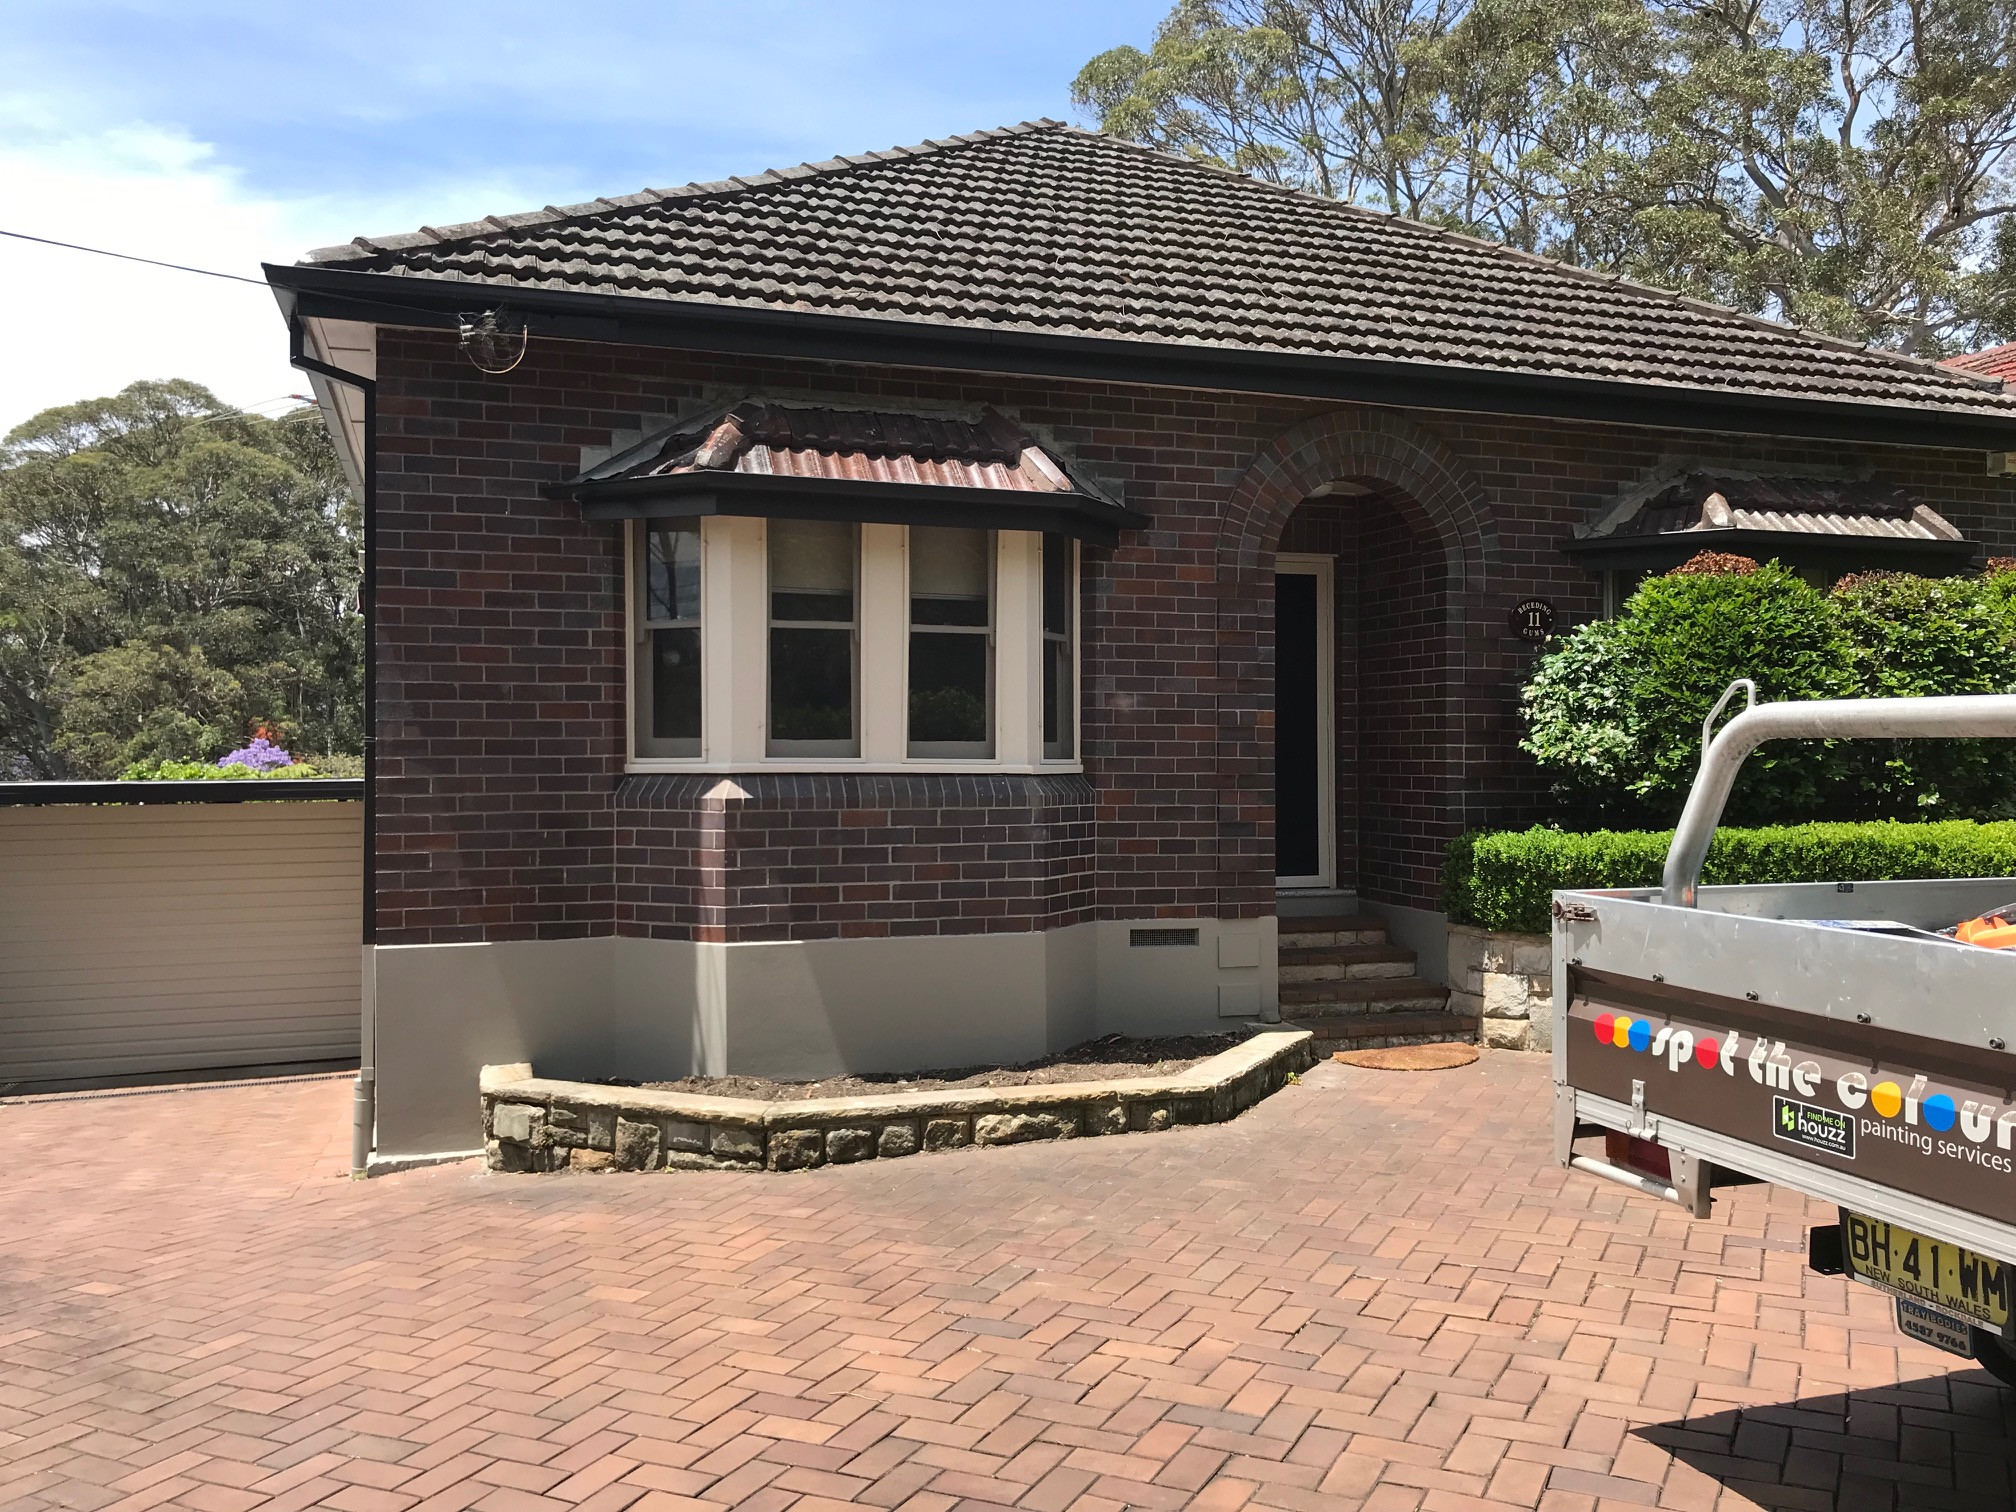 Chatswood Bungalow interior and exterior